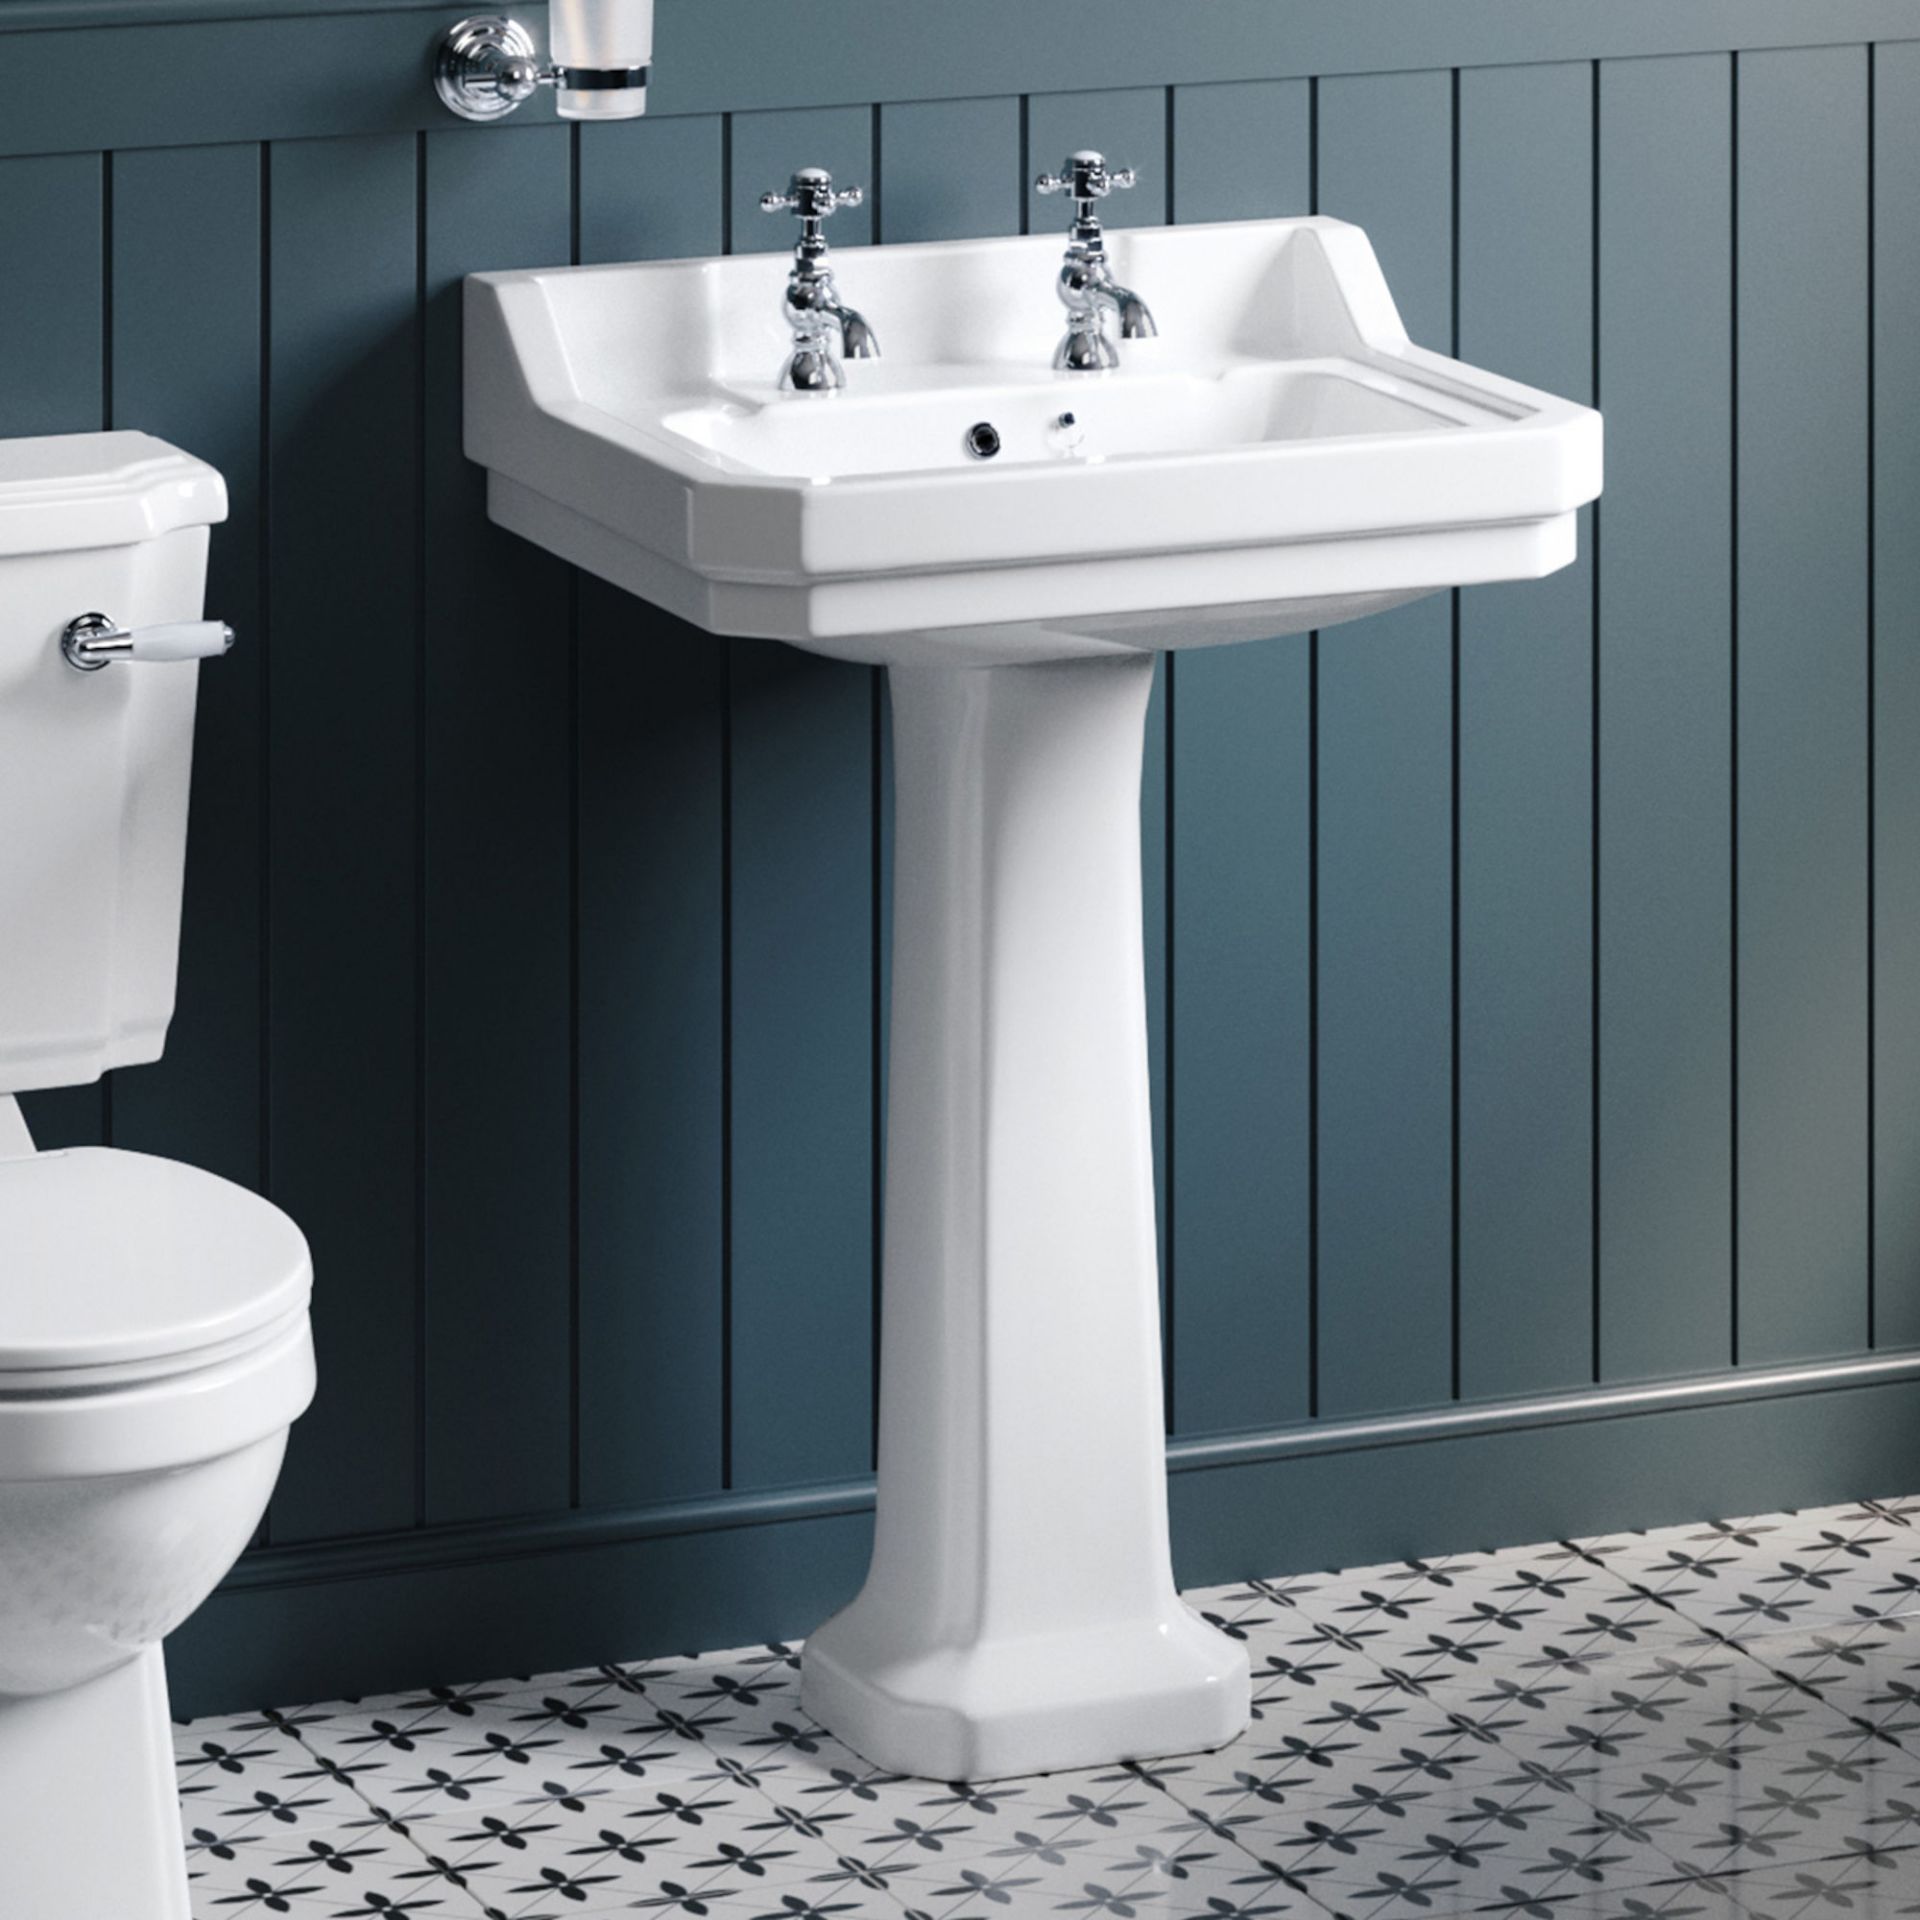 New Cambridge Traditional Basin - Double Tap Hole. RRP £224.99. (Cag629Fb2V2). Traditional Fe - Image 2 of 3